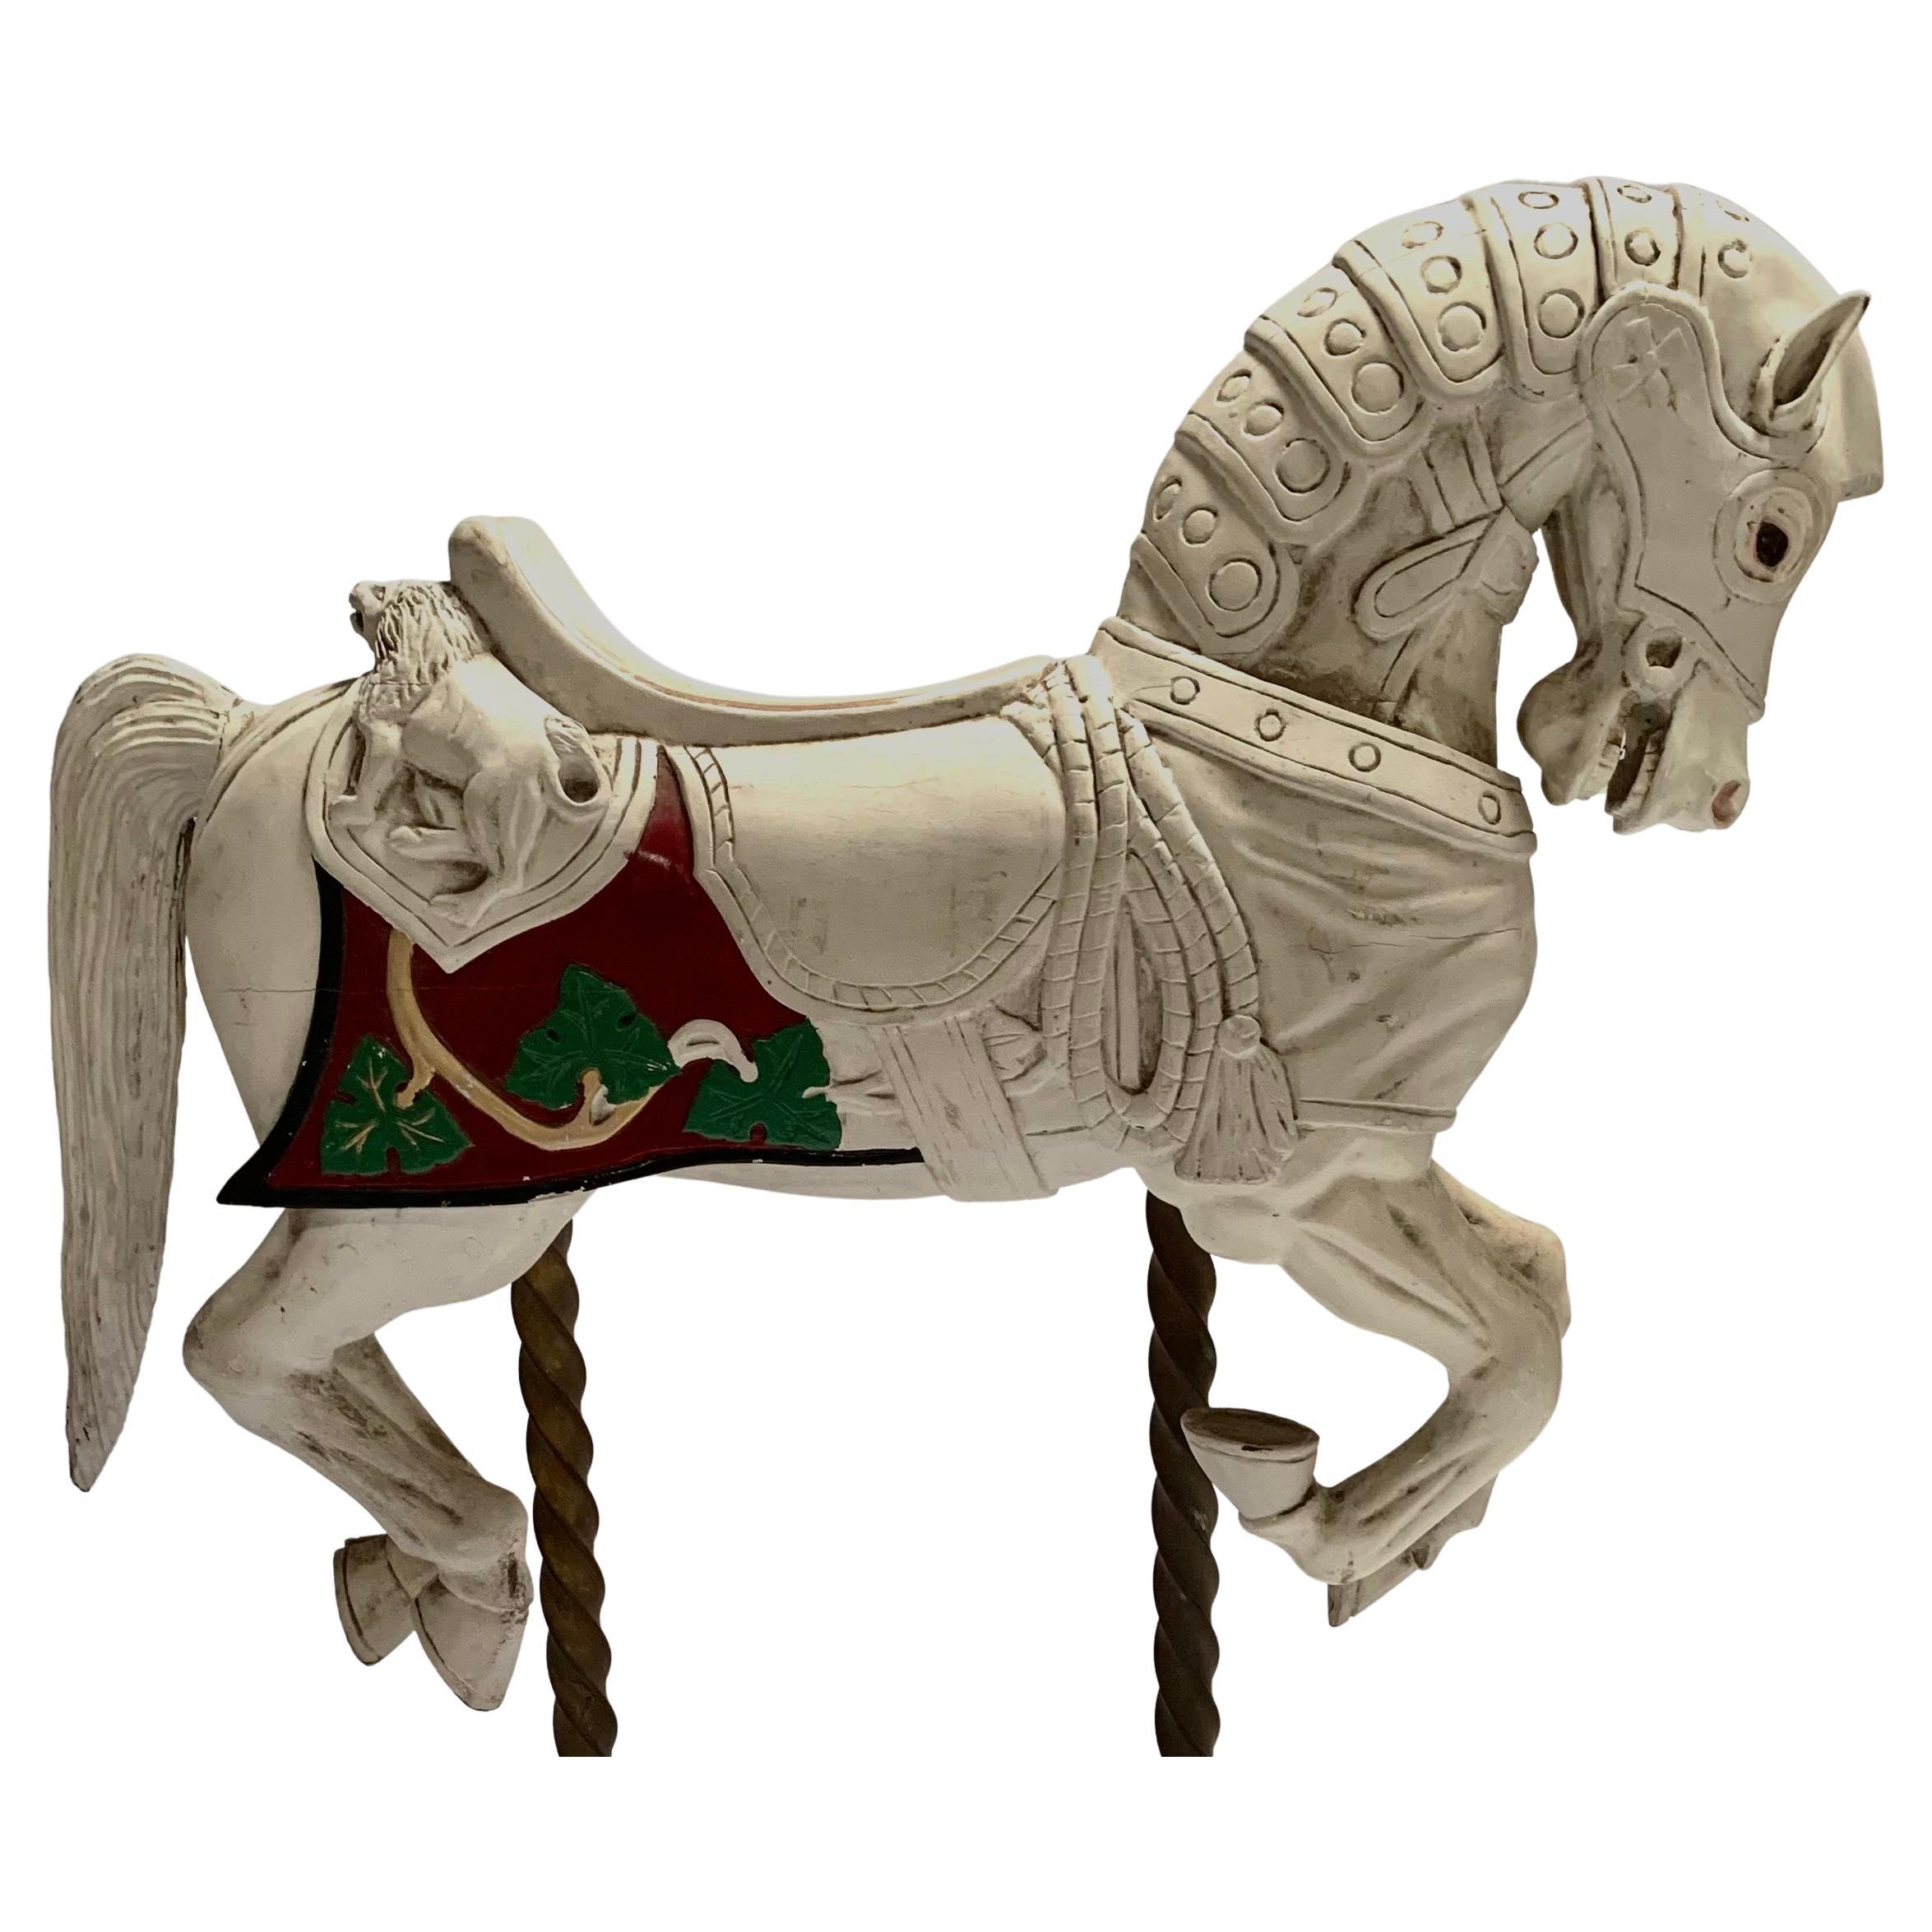 Juvenile carved wooden carousel horse carved in the style of Charles Loof.
Lions carved into the back of the saddle.
Requires little restoration.
Started to paint 40 years ago but never found the time to finish. (See photo)
Part of a private